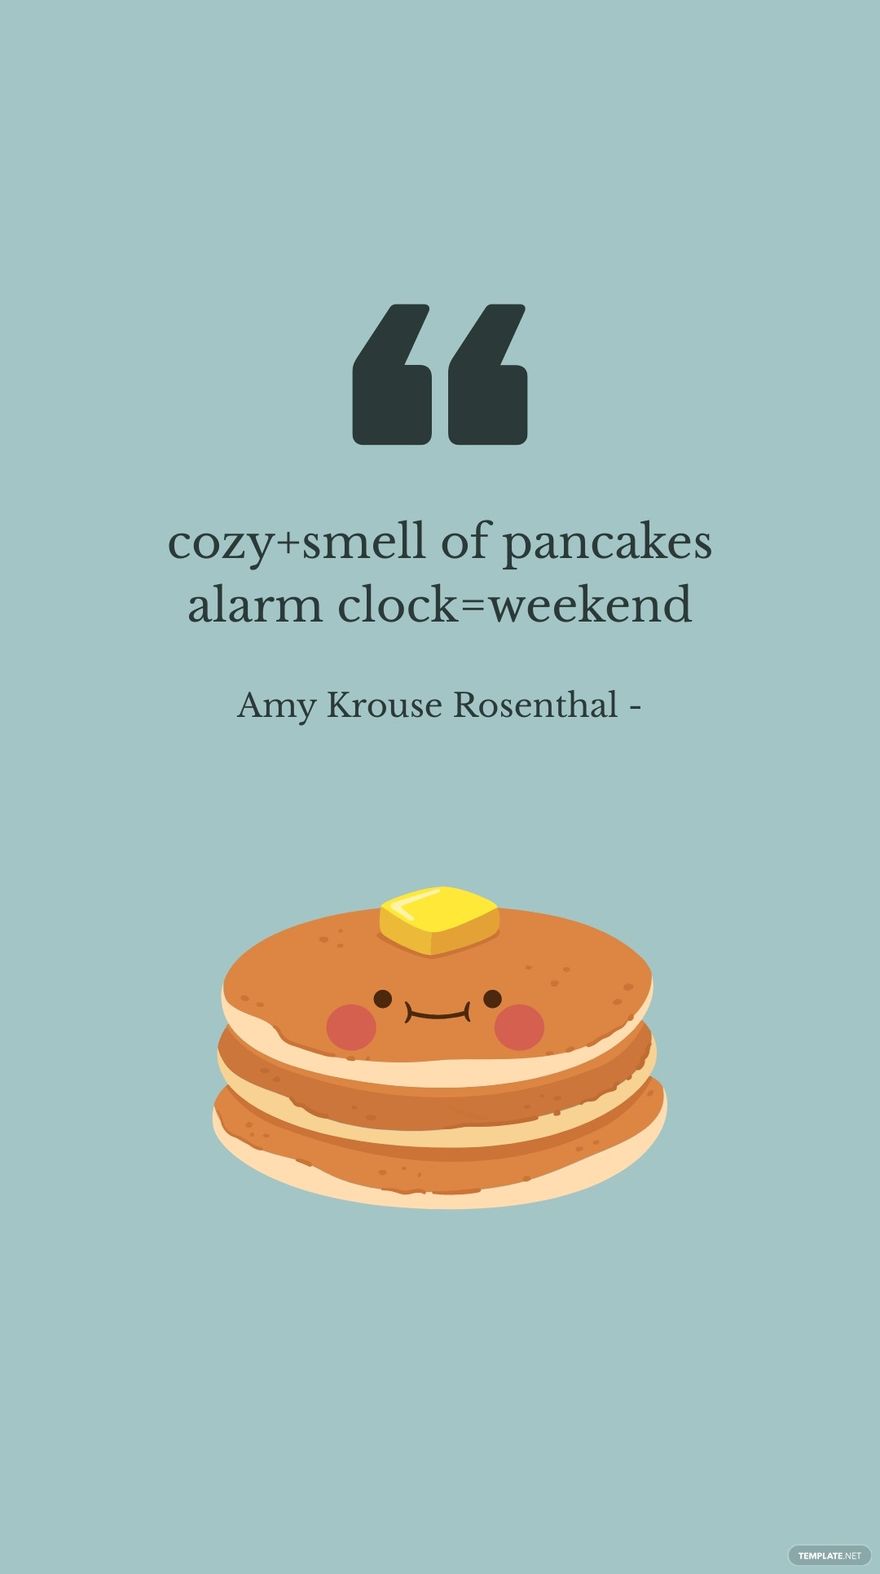 Free Amy Krouse Rosenthal - cozy+smell of pancakes alarm clock=weekend in JPG